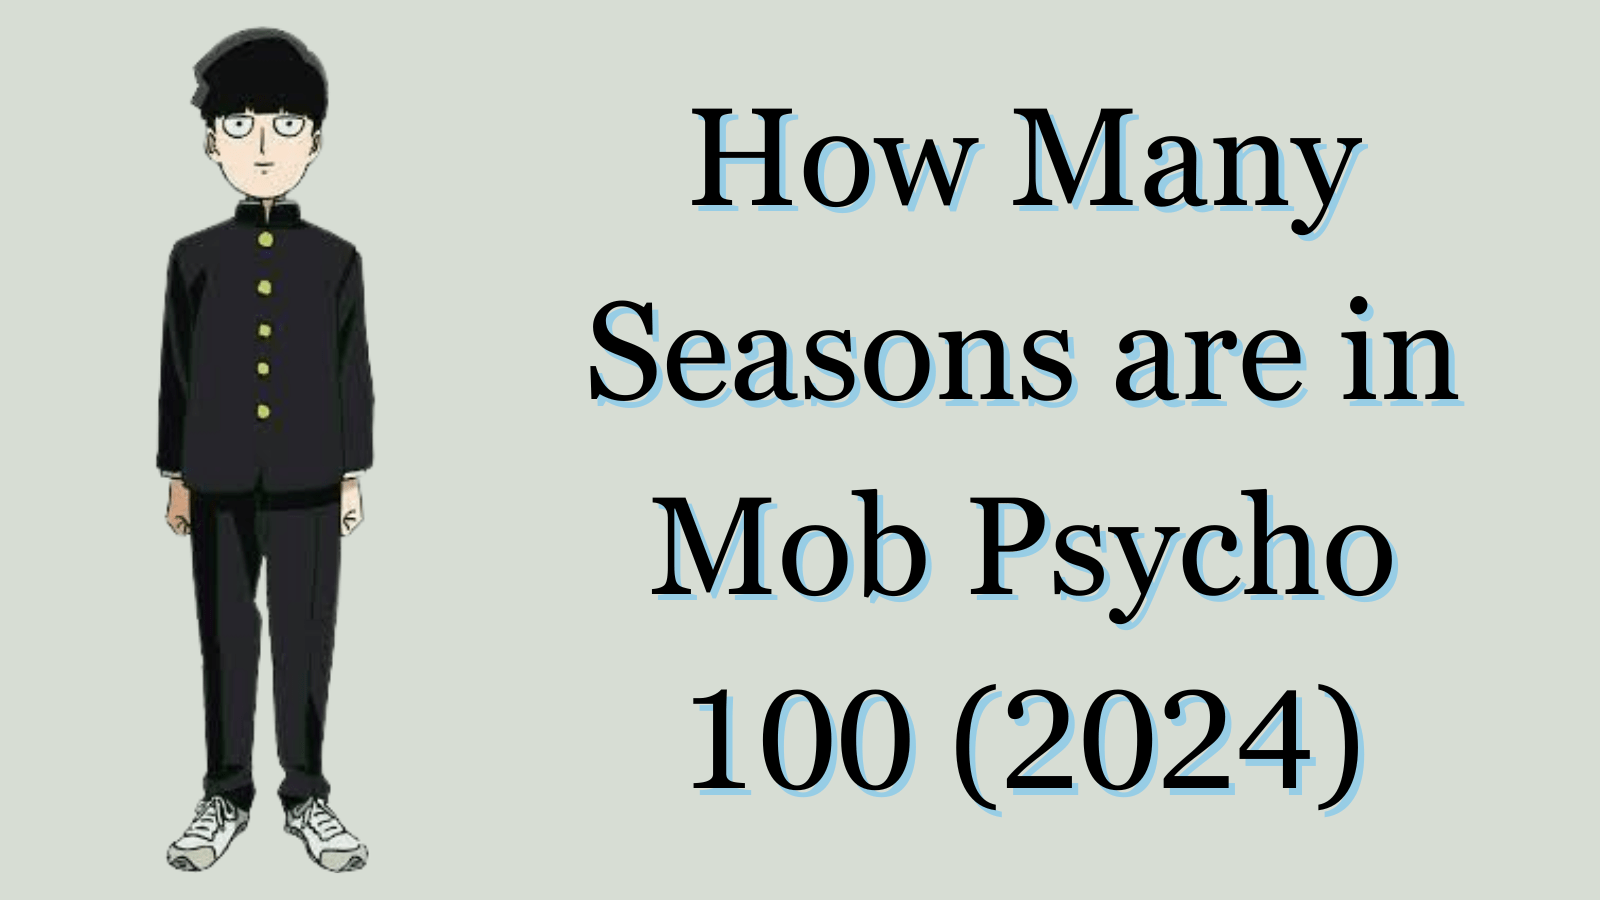 How Many Seasons are in Mob Psycho 100